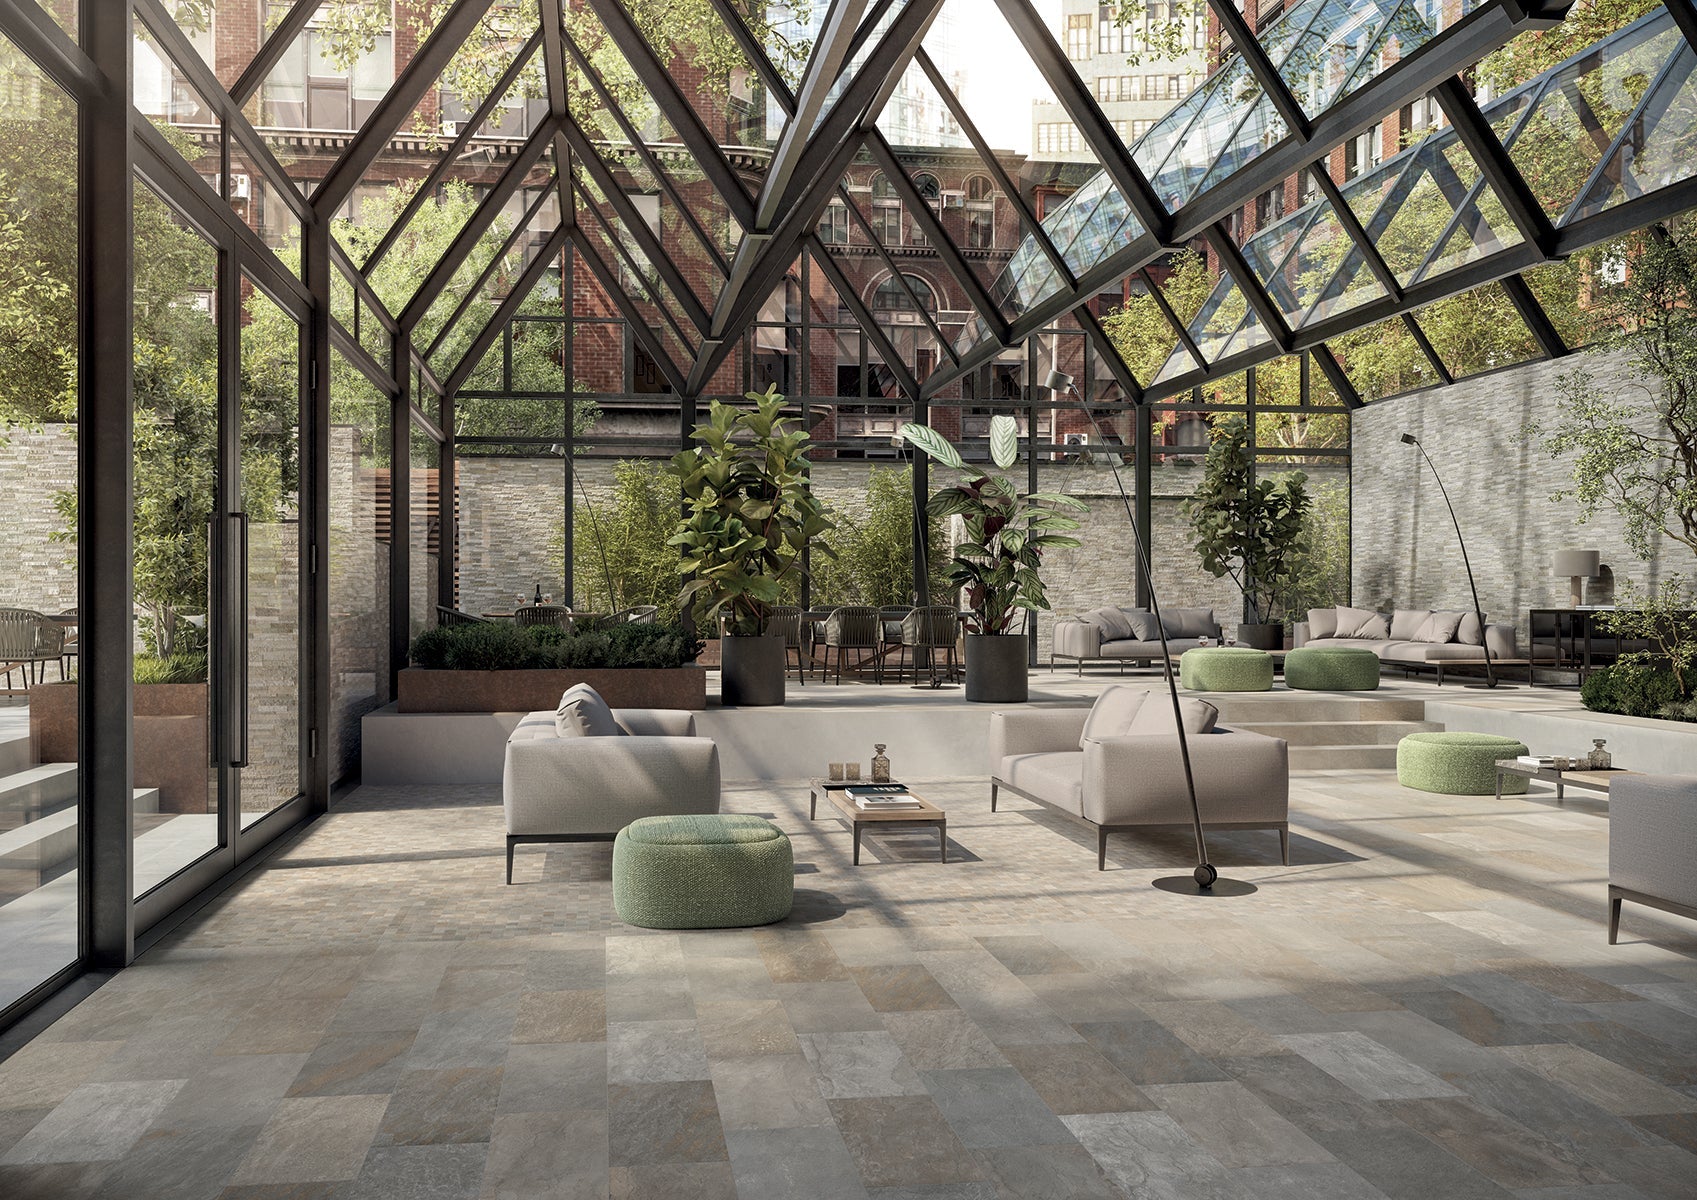 Porcelain tile collection from Surface Group featuring bluestone-inspired design in a modern conservatory setting with ample natural light and stylish furniture.